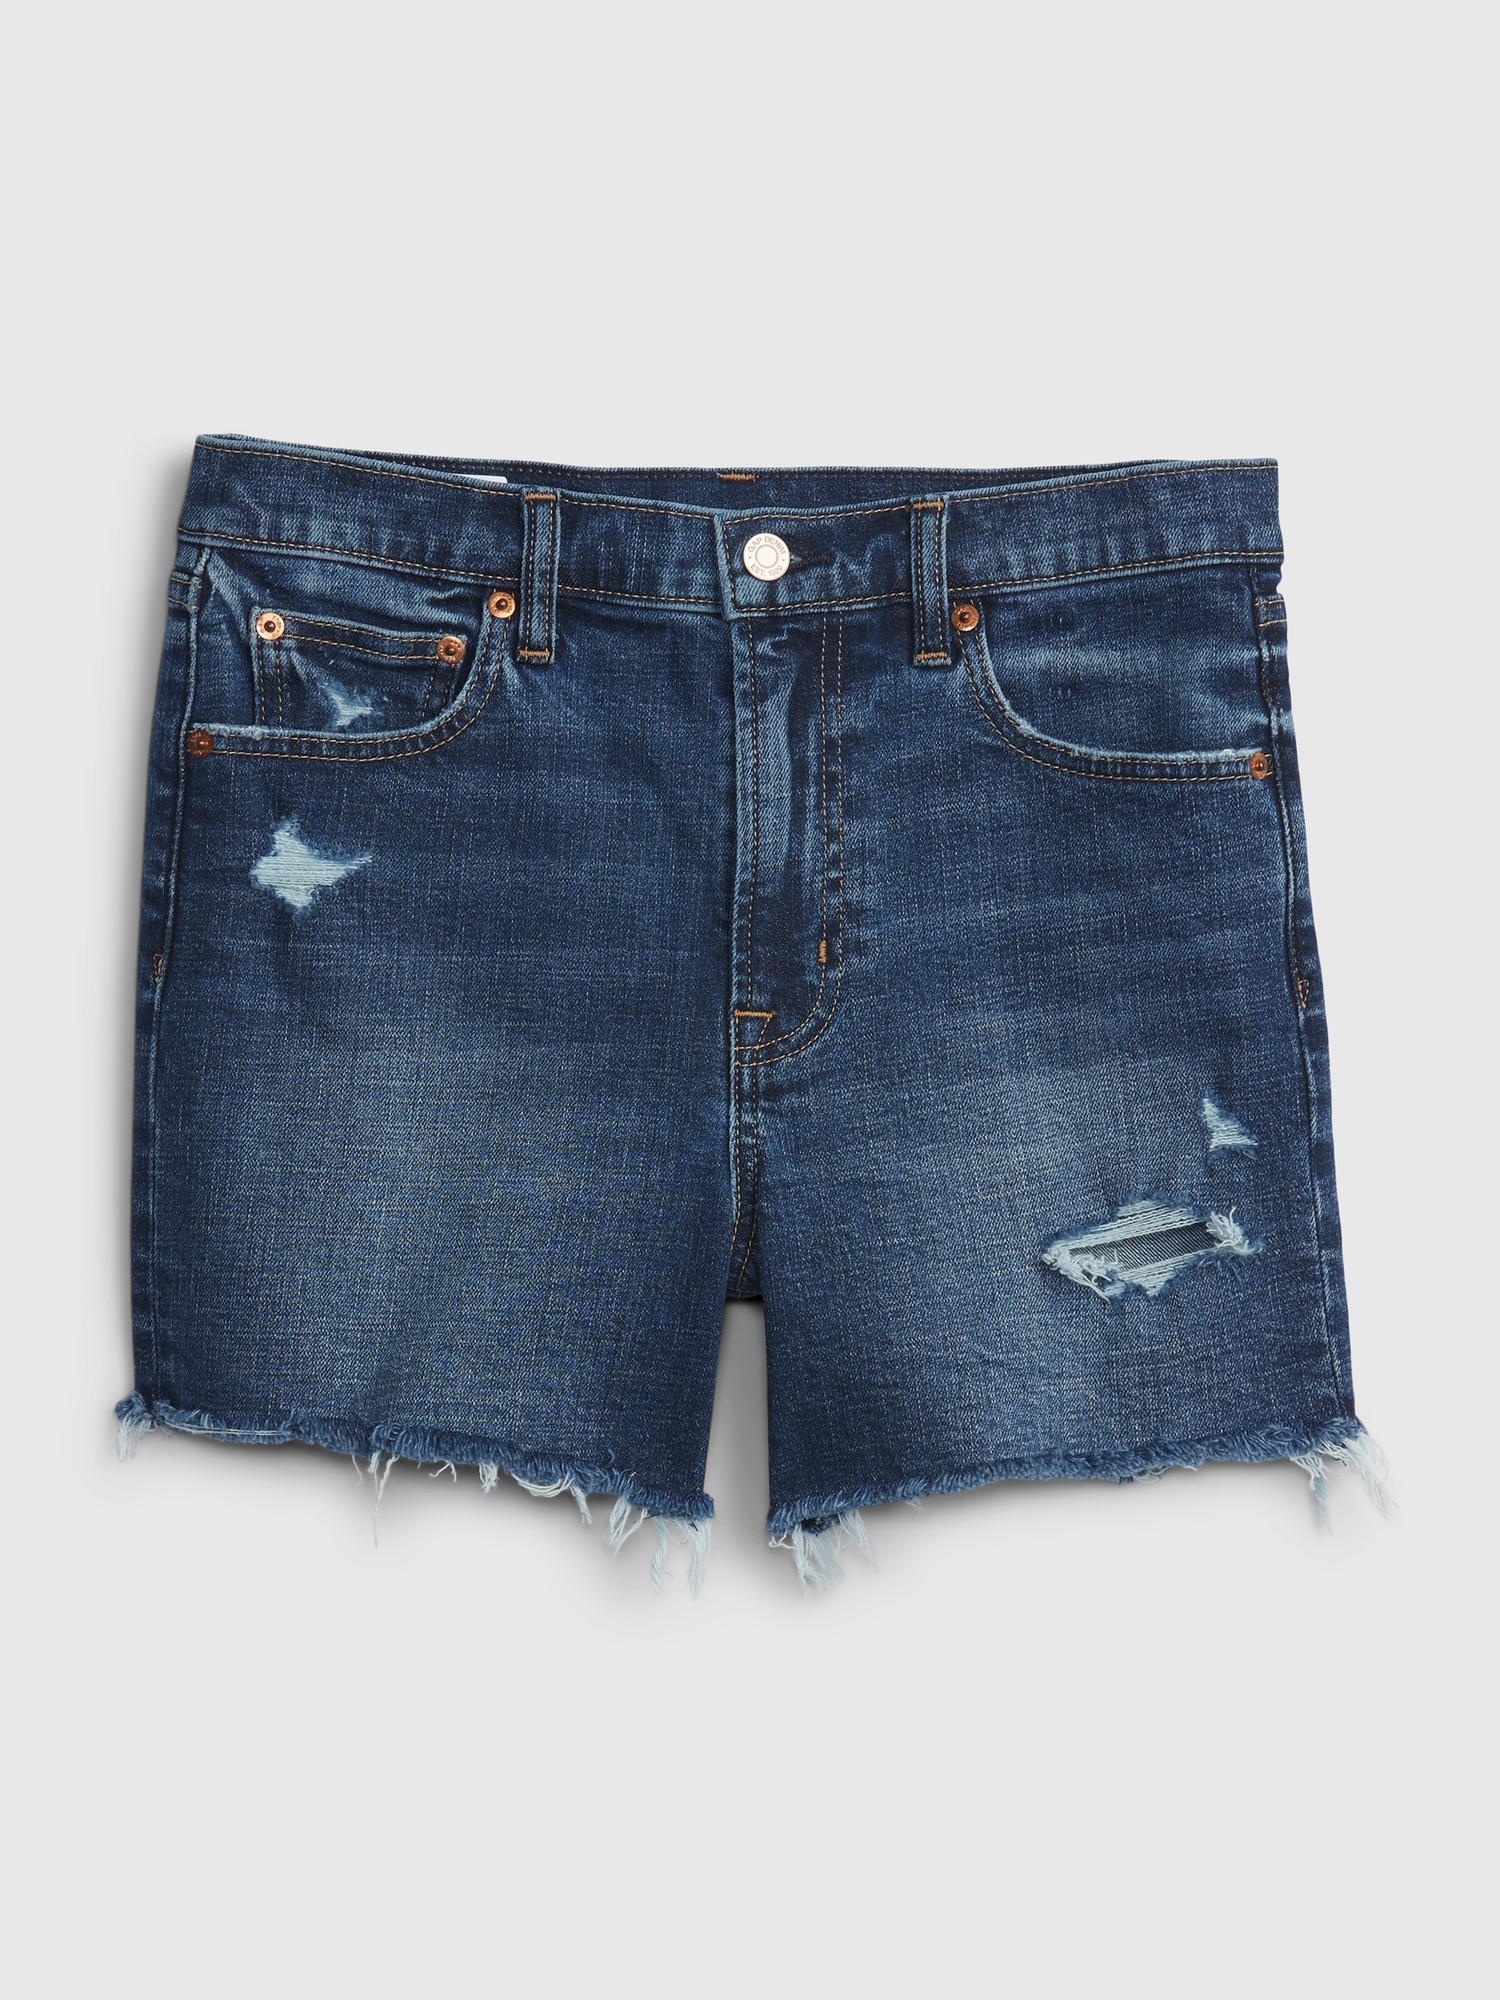 Madewell Relaxed Denim Shorts light Wash Button Fly Raw Hem Size 30. Waist  flat lay 19 inches Rise 12 inches Inseam 3 inches Id350